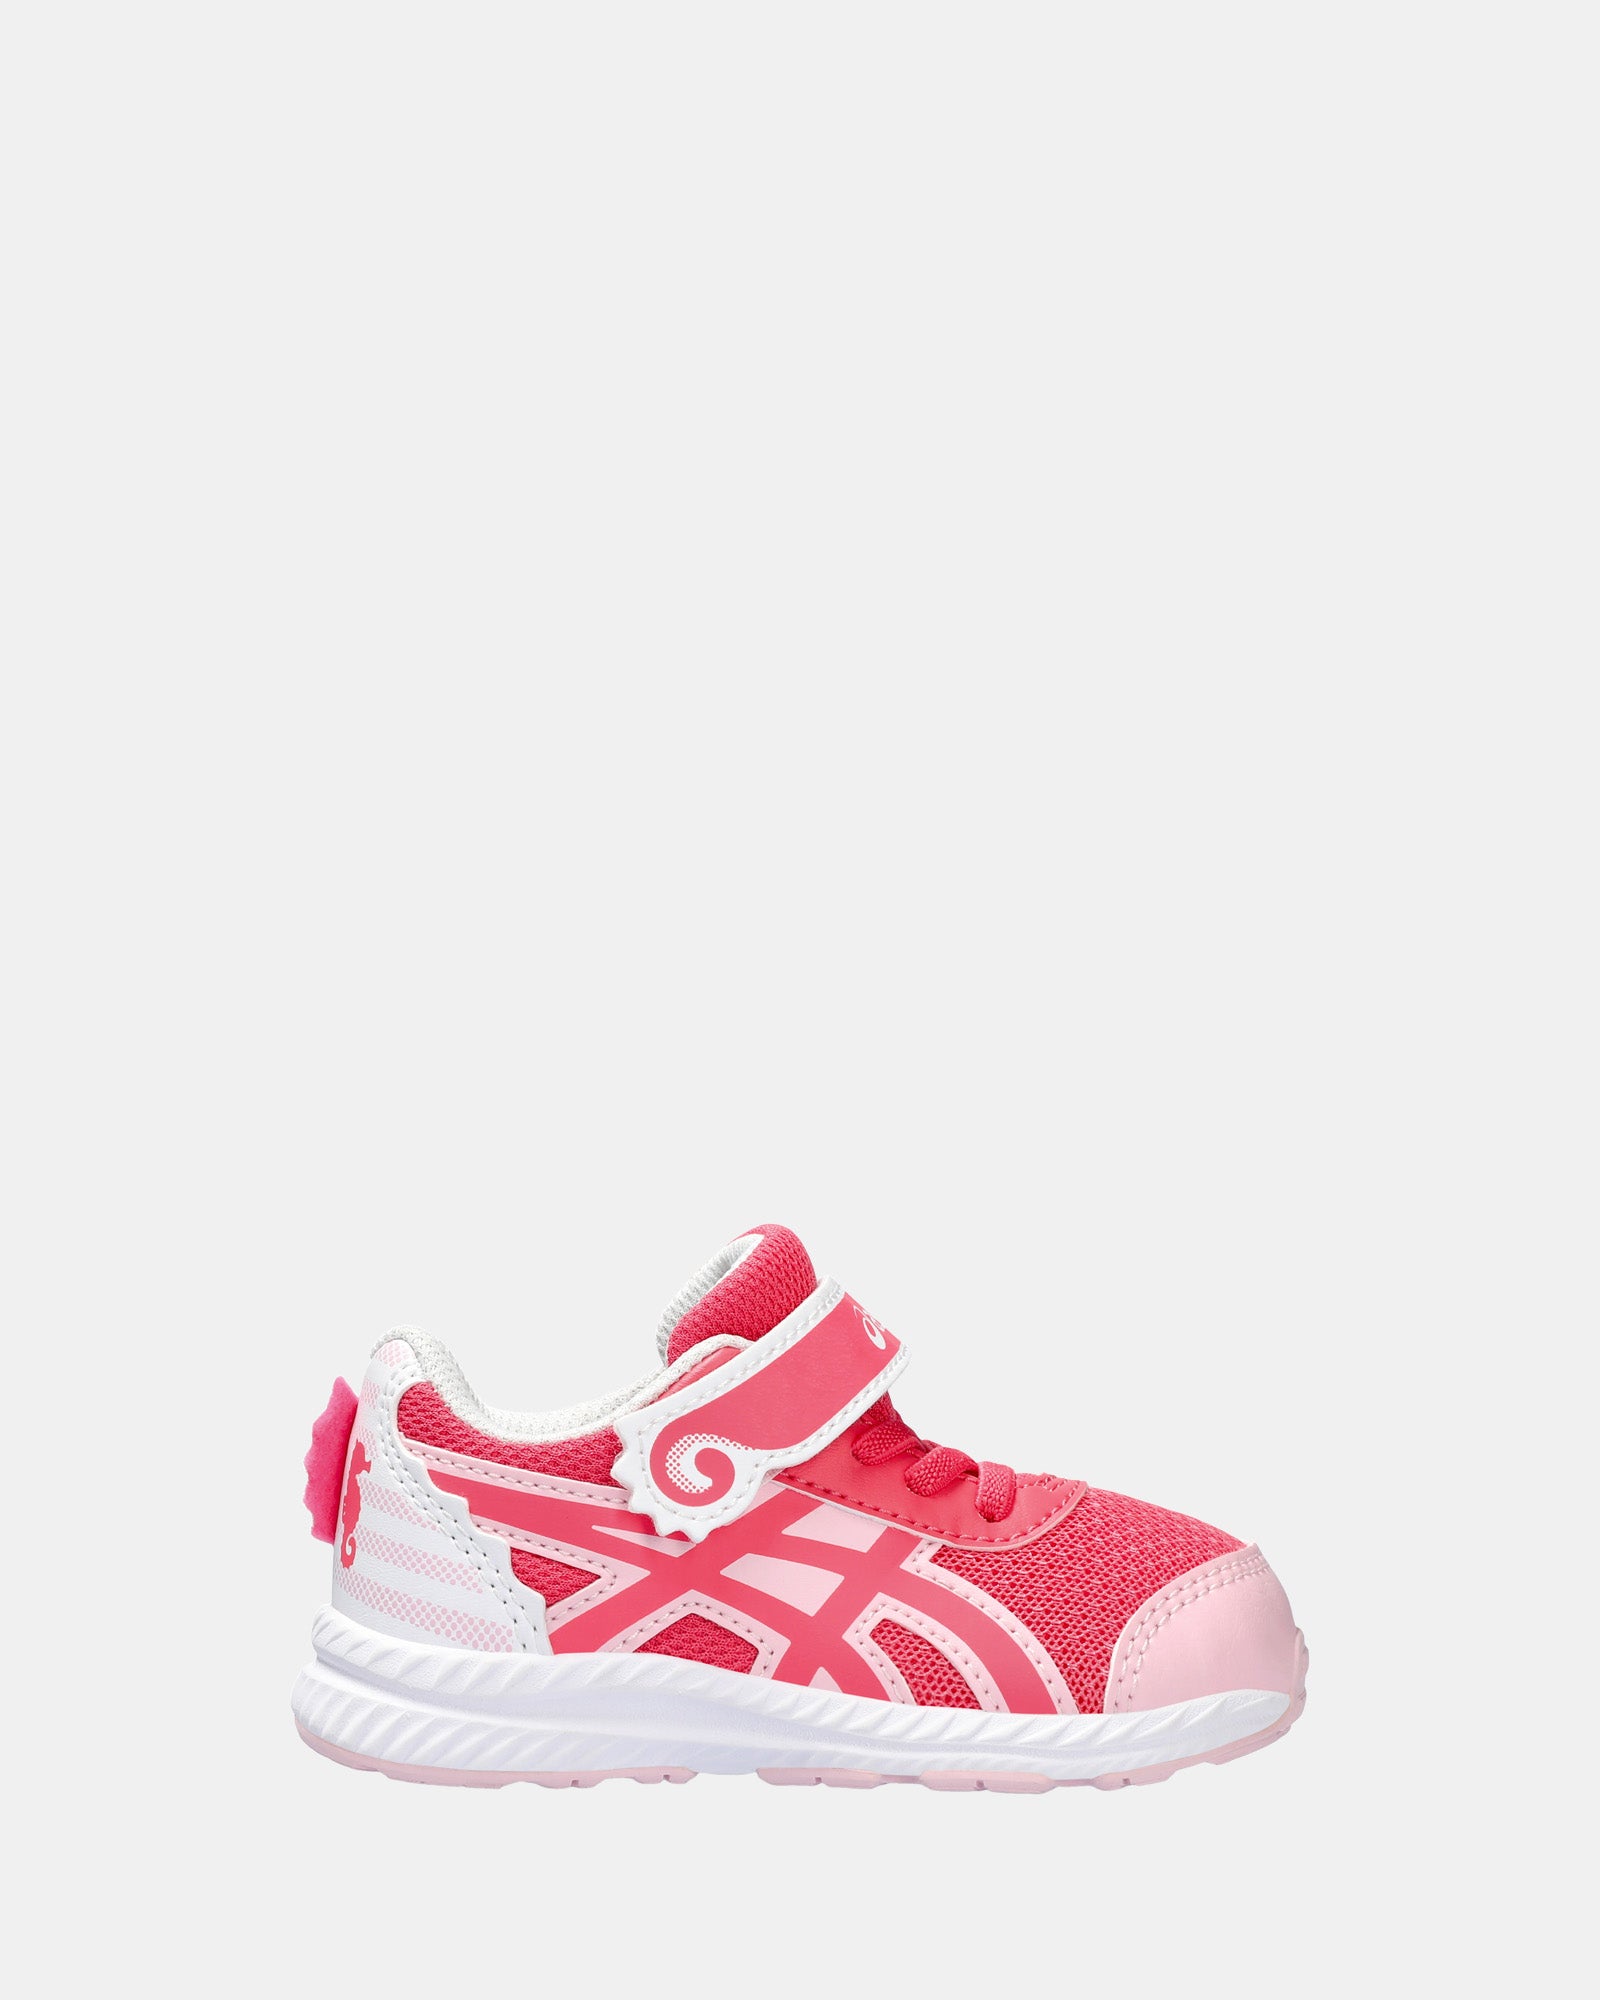 Contend 8 School Yard Infant Pink Cameo/Cotton Candy